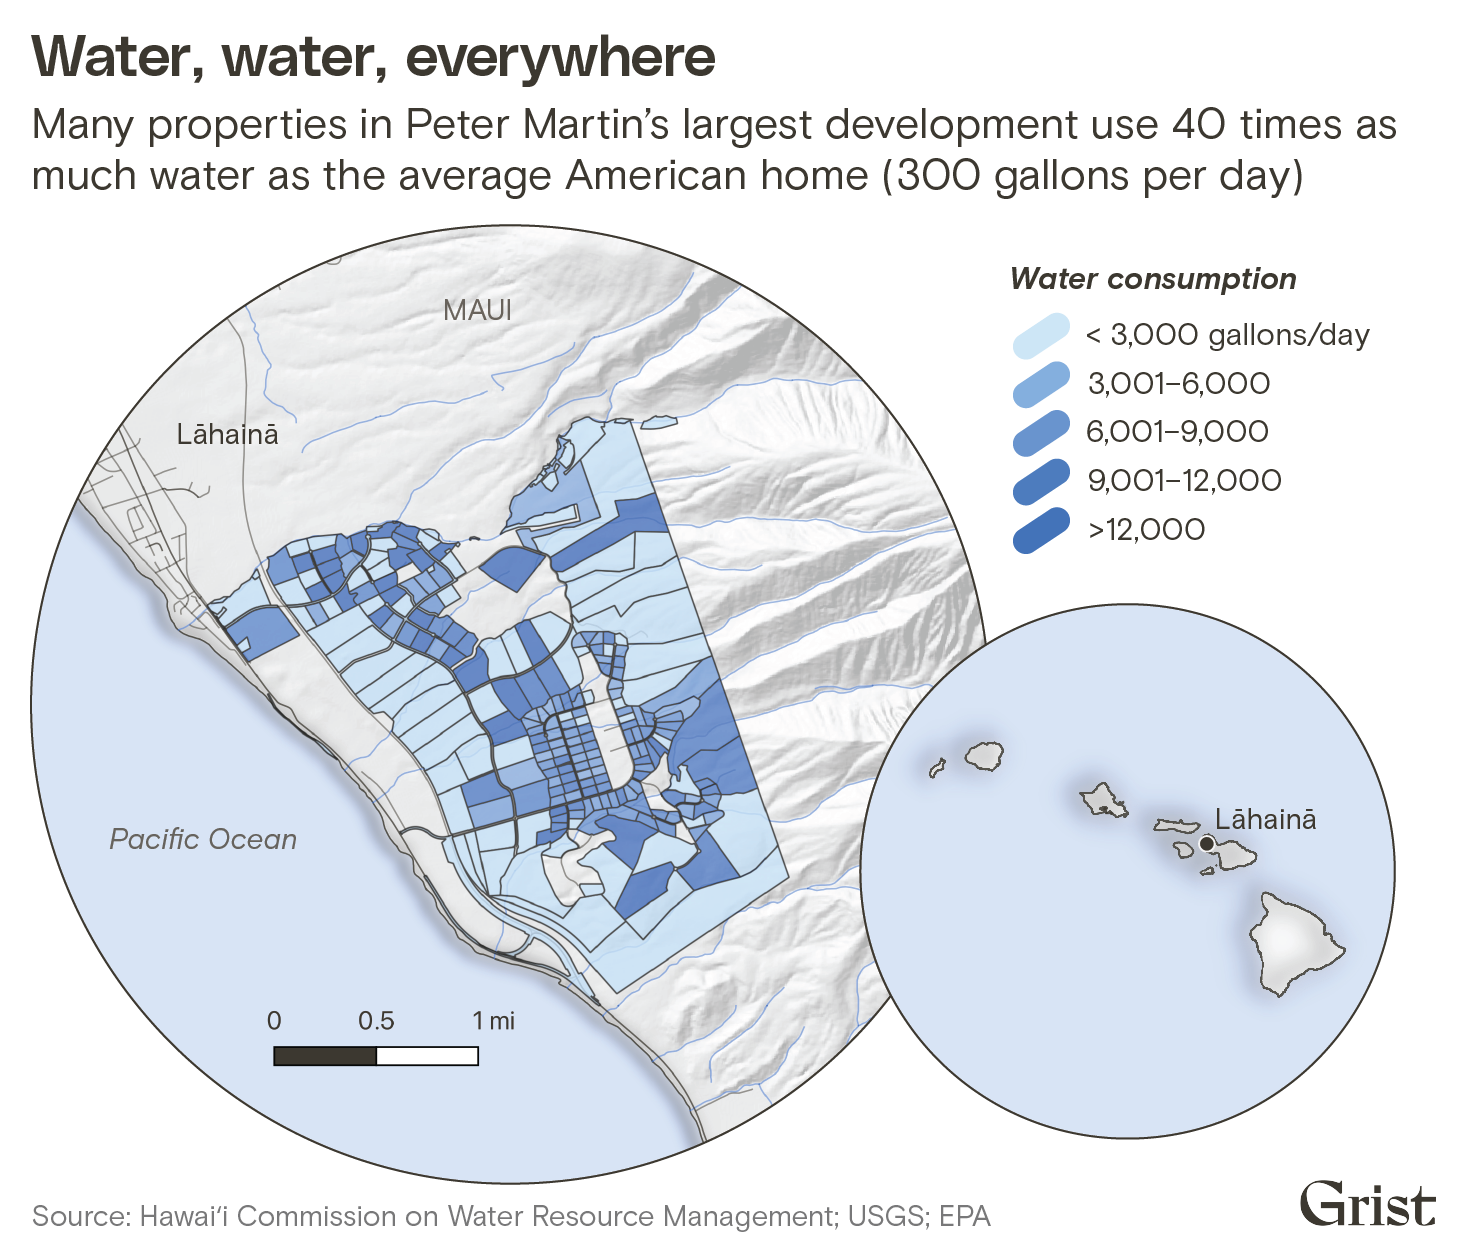 A choropleth map showing Peter Martin's largest development around Lāhainā in Maui. Many properties in the development use 40 times as much water as the average American home (300 gallons per day).